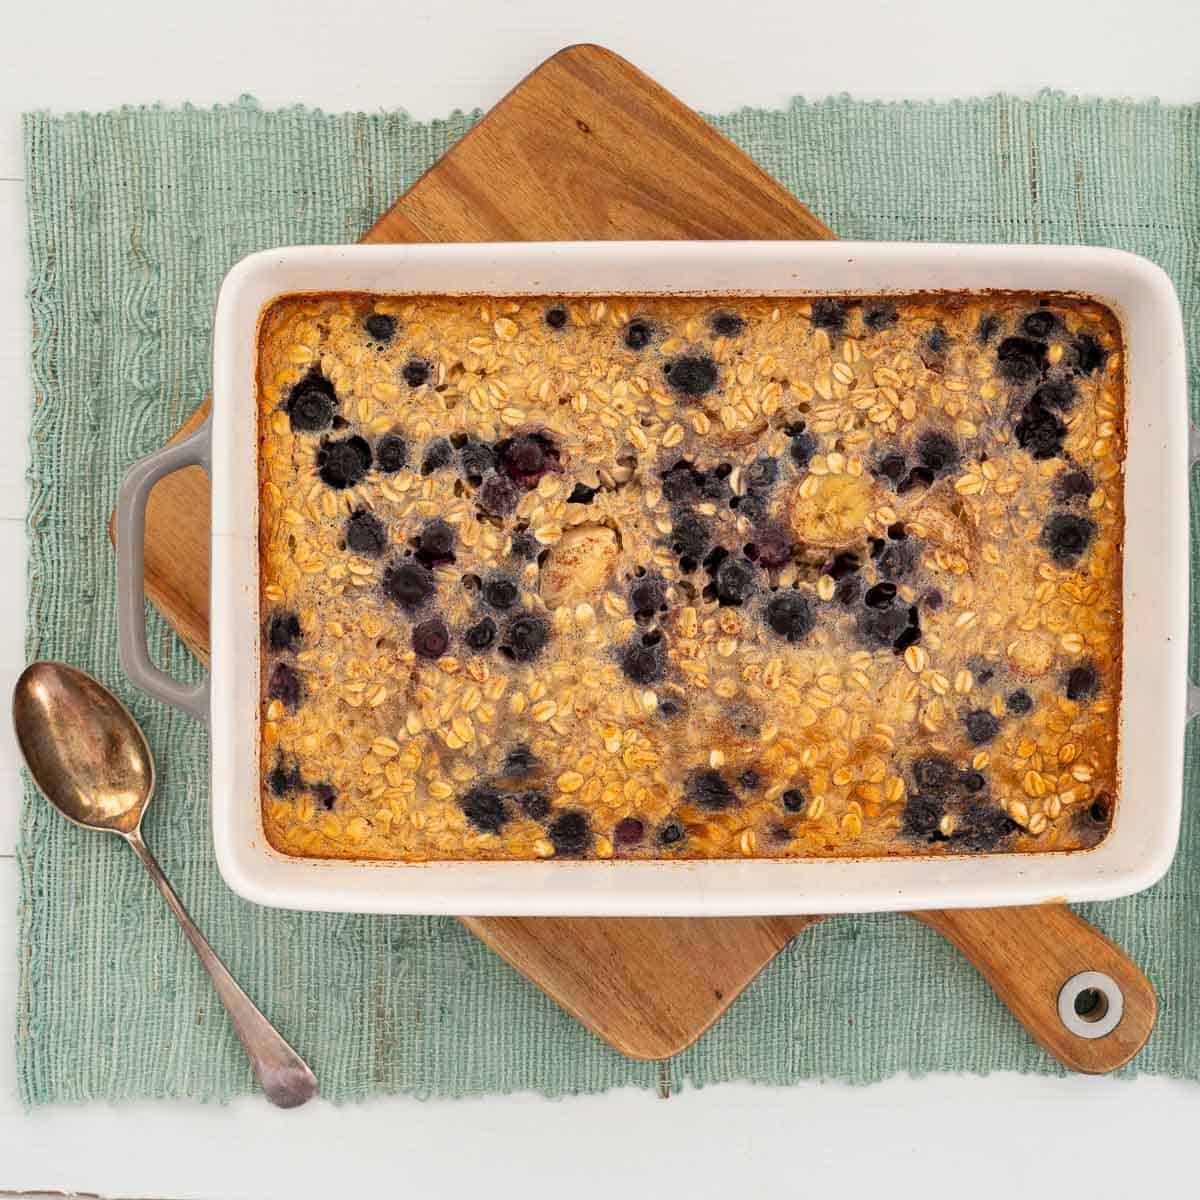 A baking dish filled with blueberry baked oats sitting on a wooden board with a serving spoon.